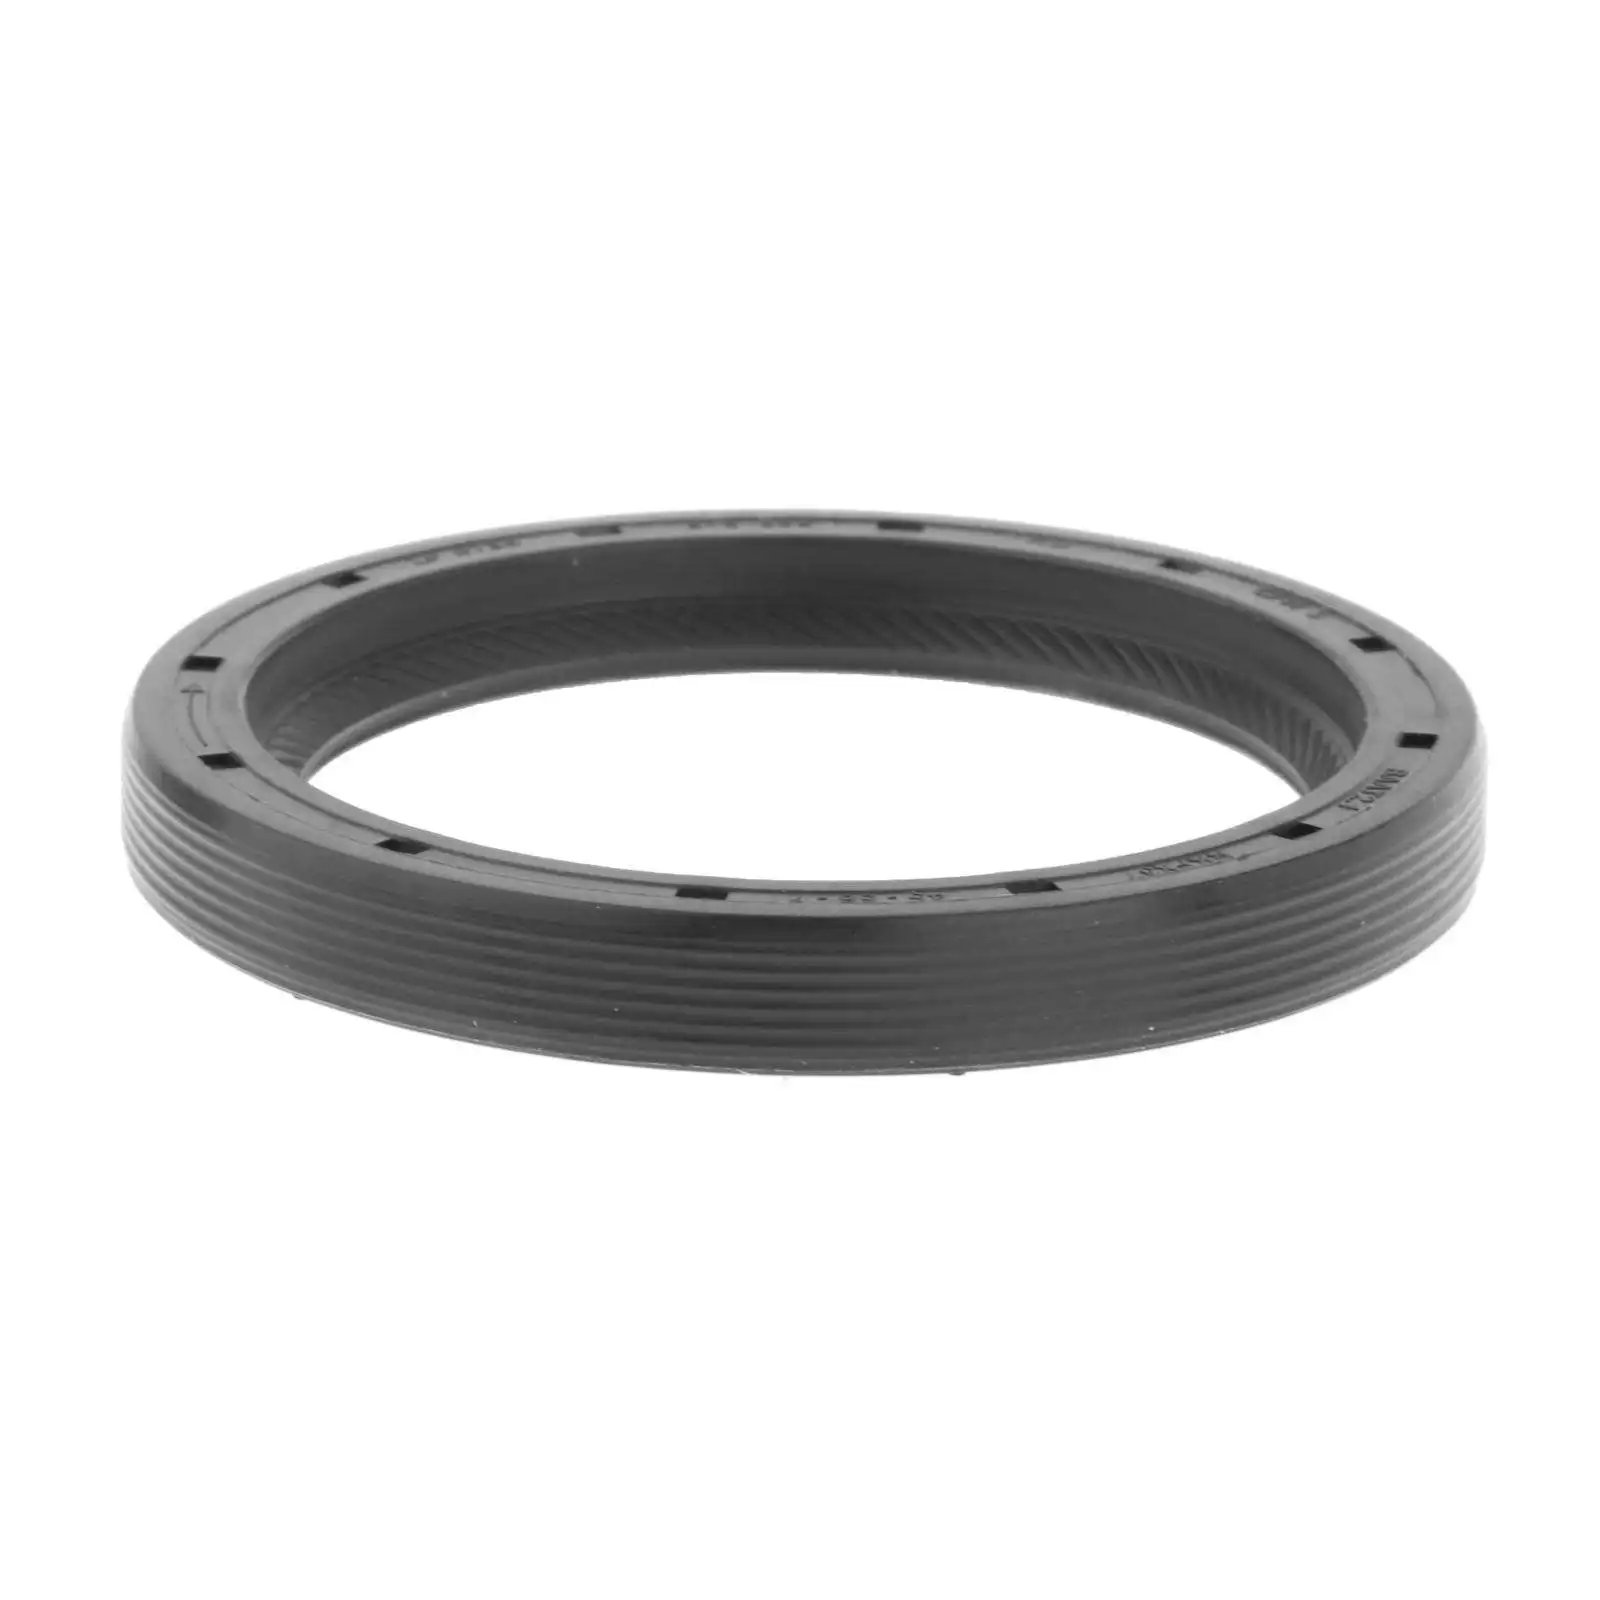 6HP19 6HP26 Transmission Oil Seal fits for , Durable Premium Material